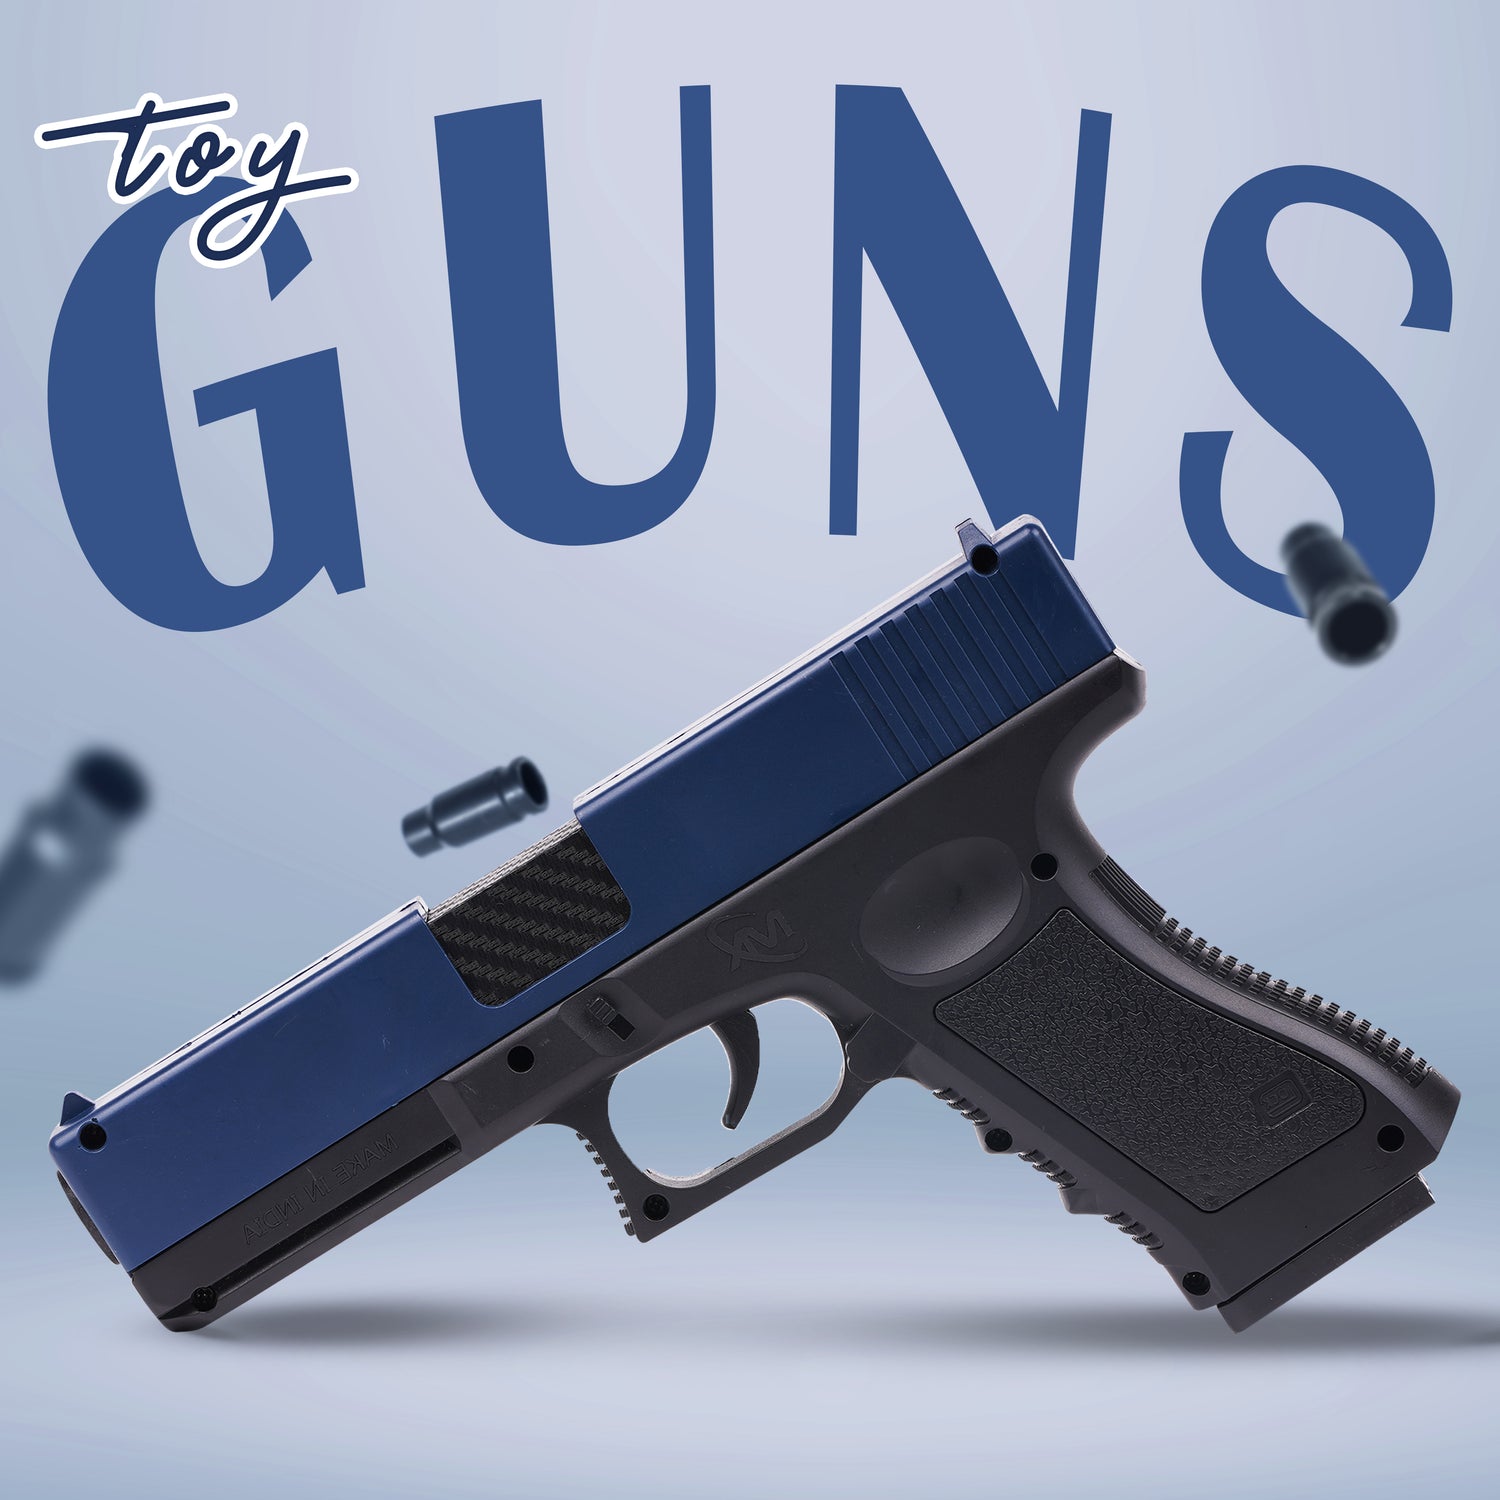 Toy Guns For Kids | Buy Toy Guns for Kids - Shop the Best Collection Online